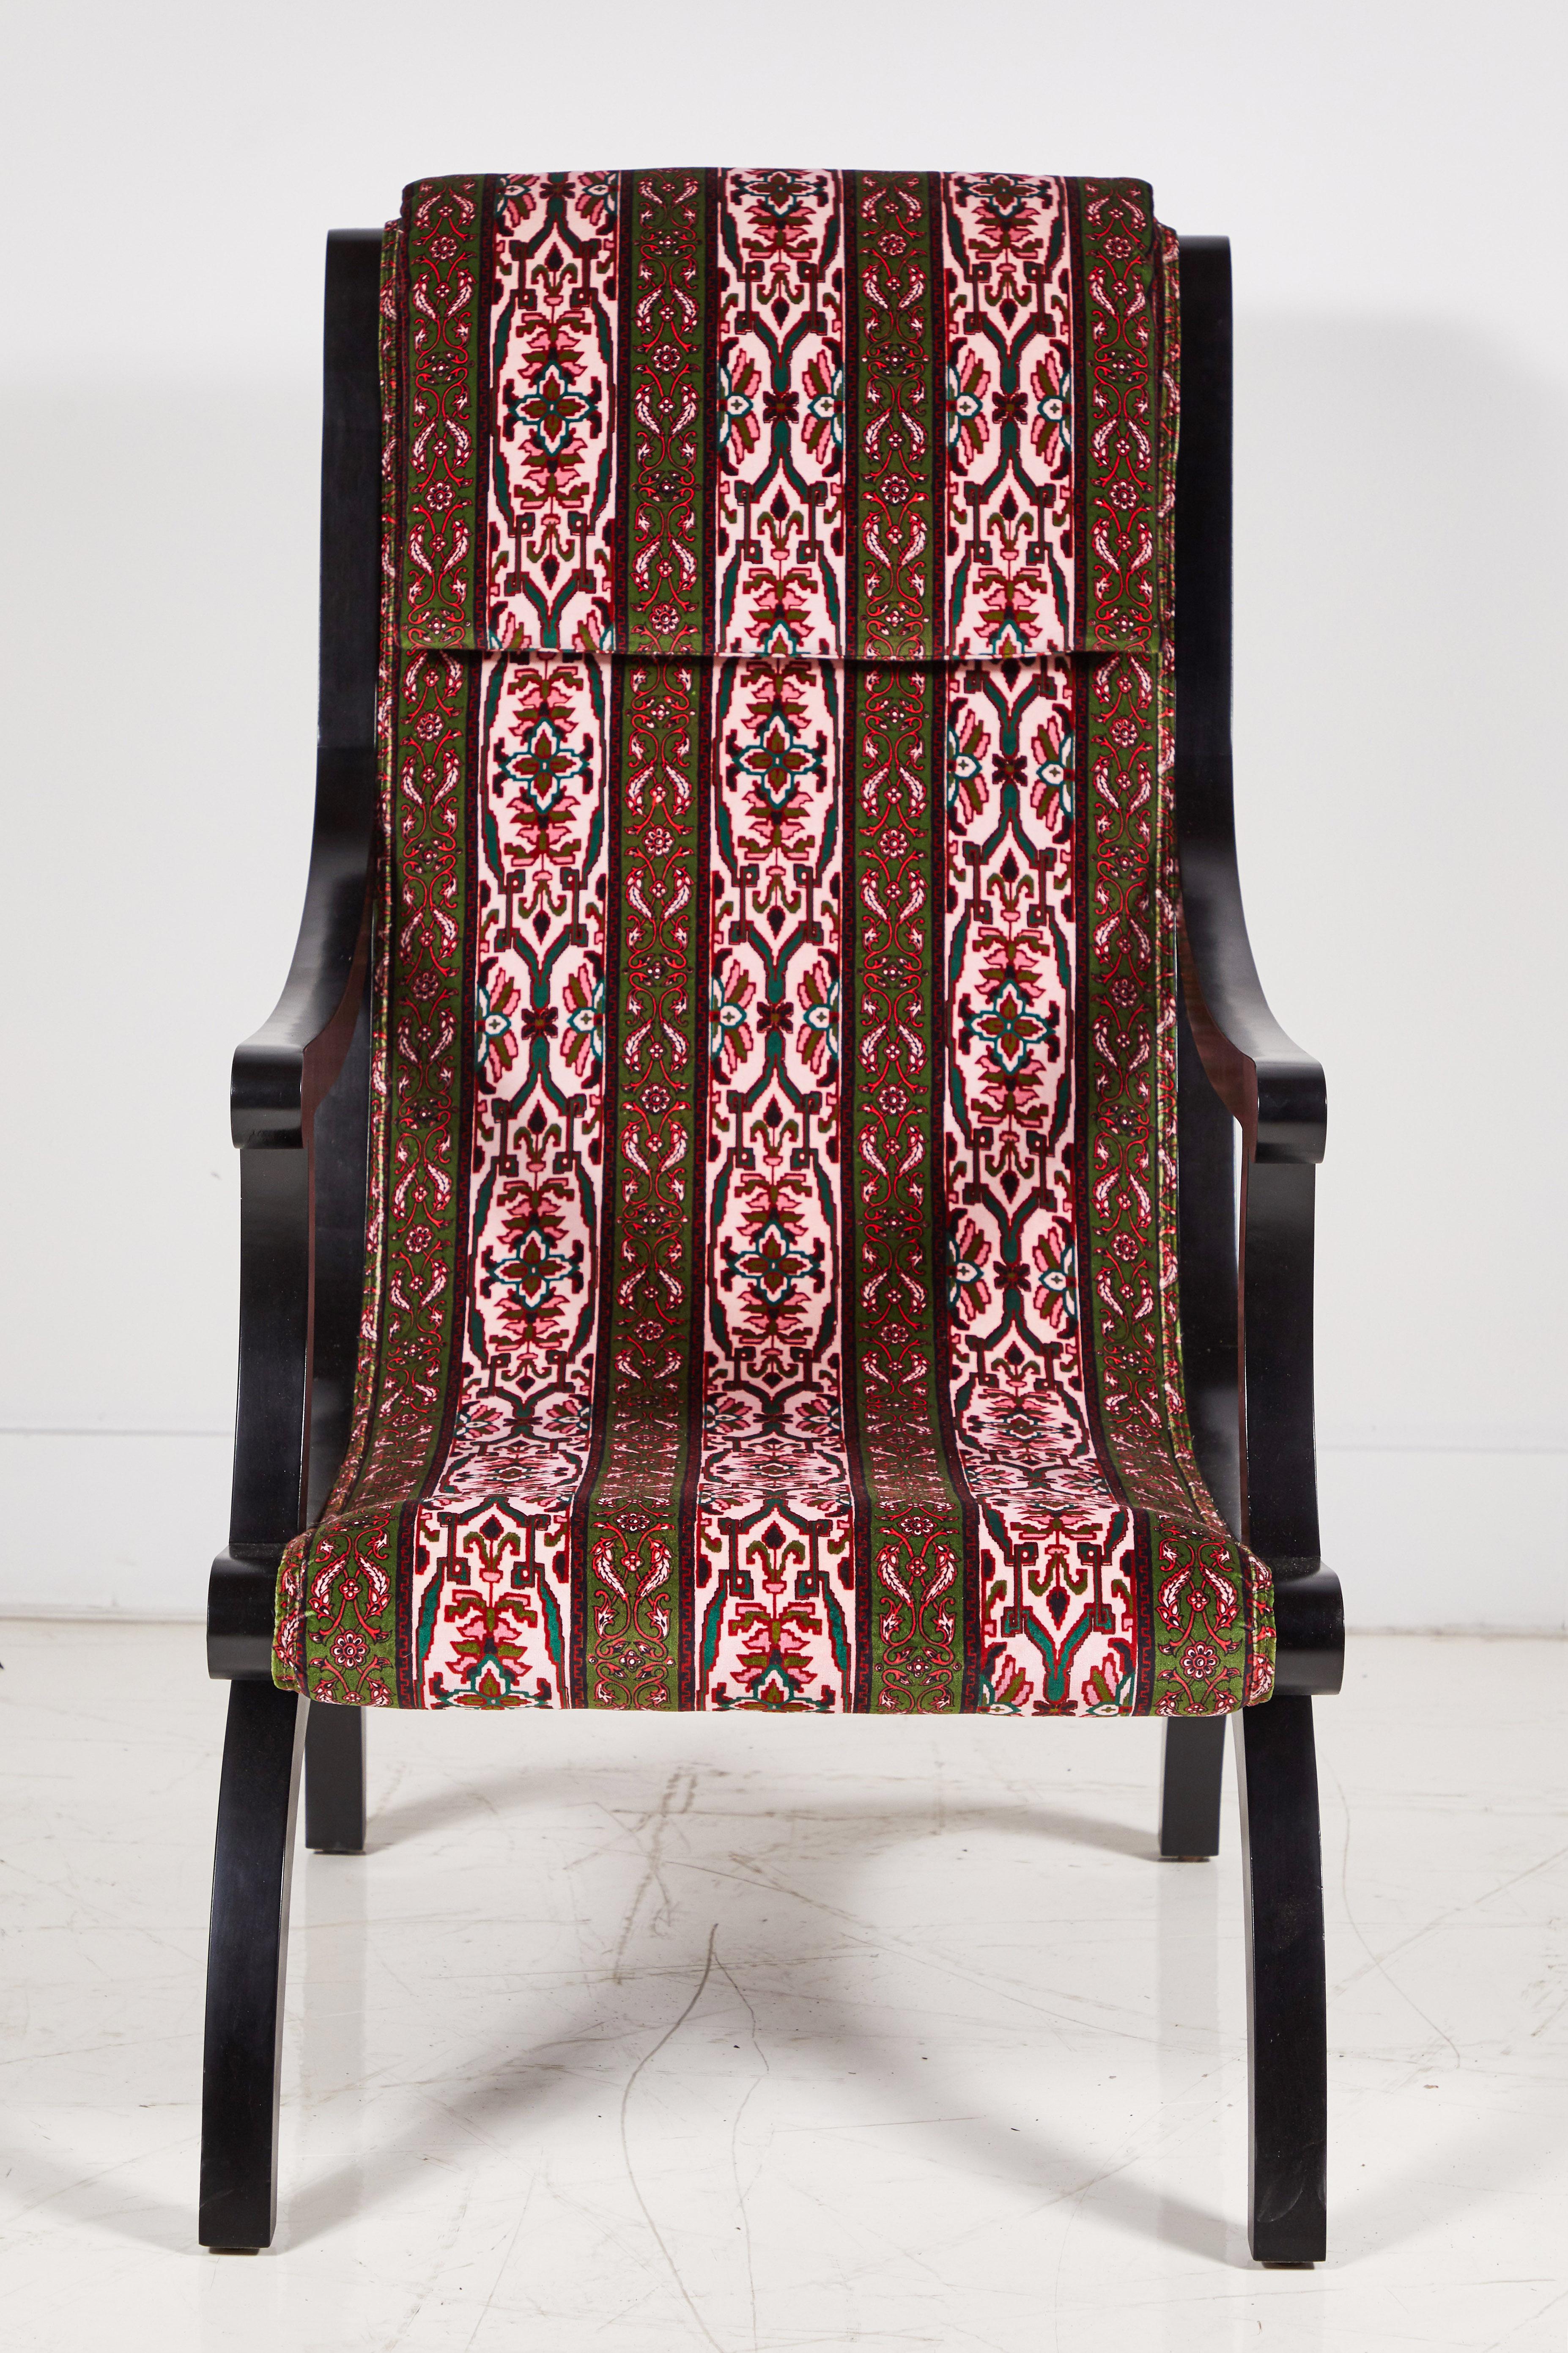 Contemporary Curved Black Framed Tall Arm Chair Upholstered in House of Hackney Velvet Fabric